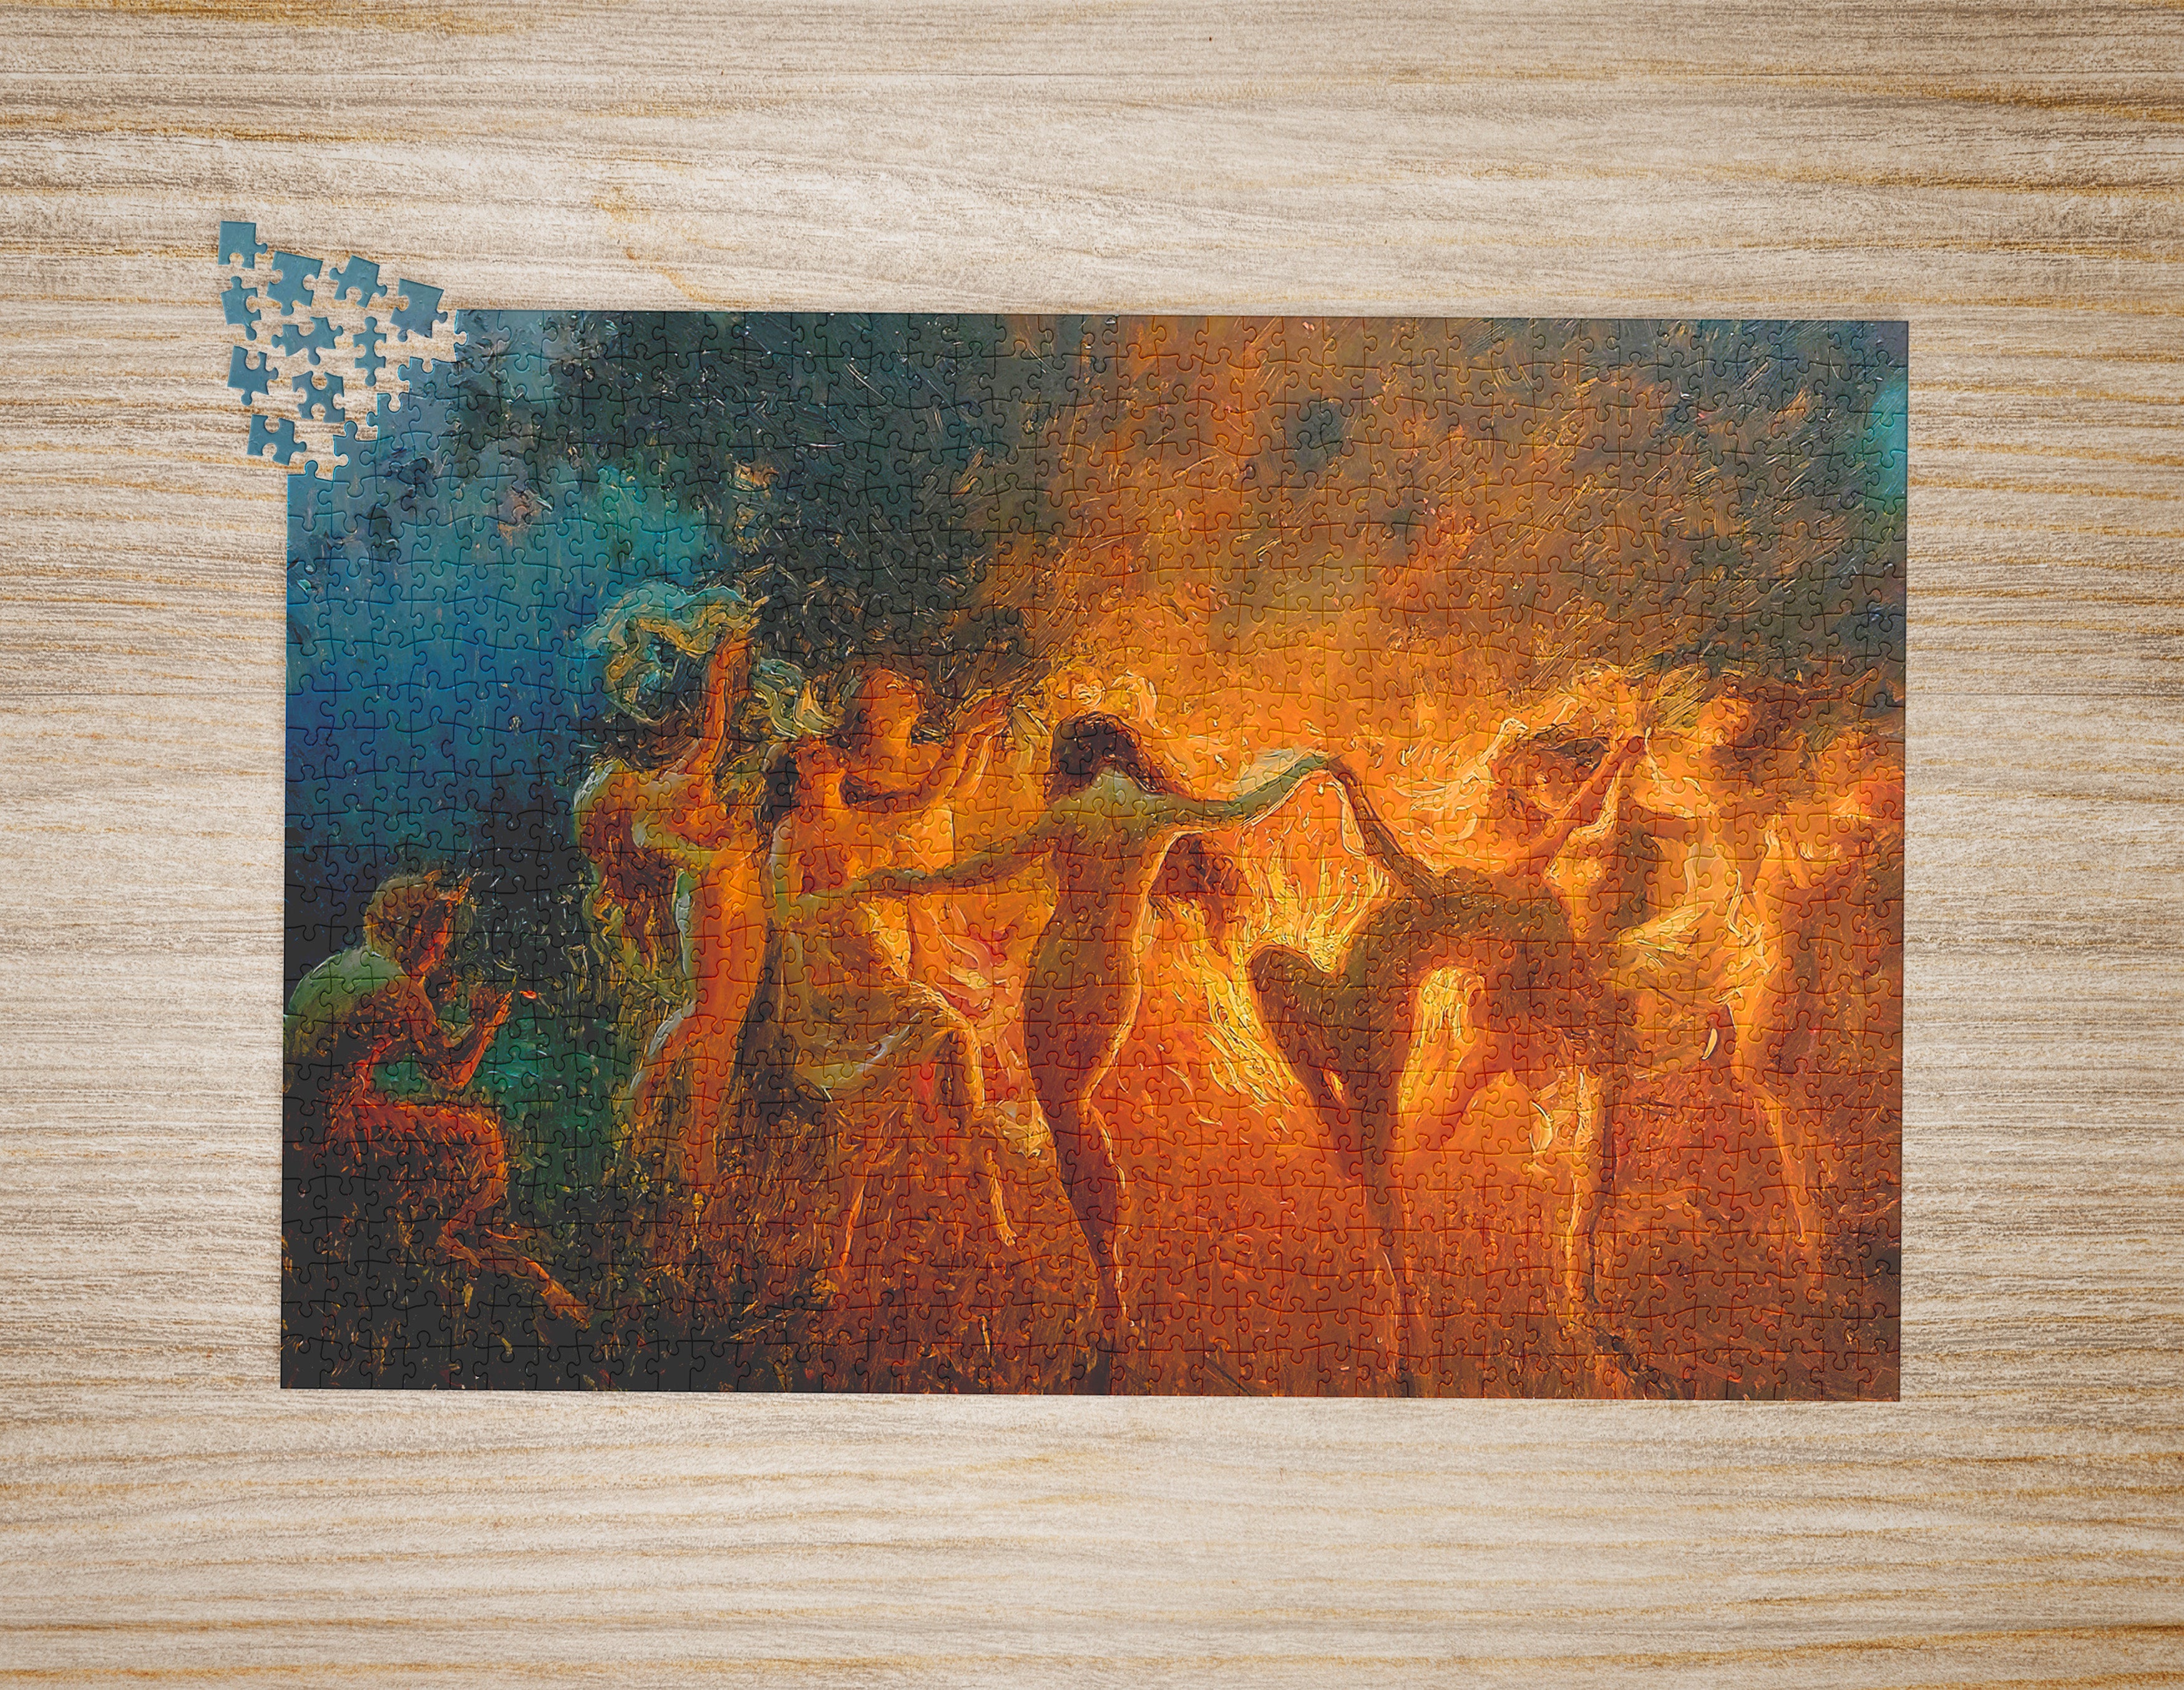 Nude Nymphs Dancing to Pan's Flute Around the Fire by Joseph Tomanek, 1,014 Piece Puzzle in Gift Box, 20in x 30in